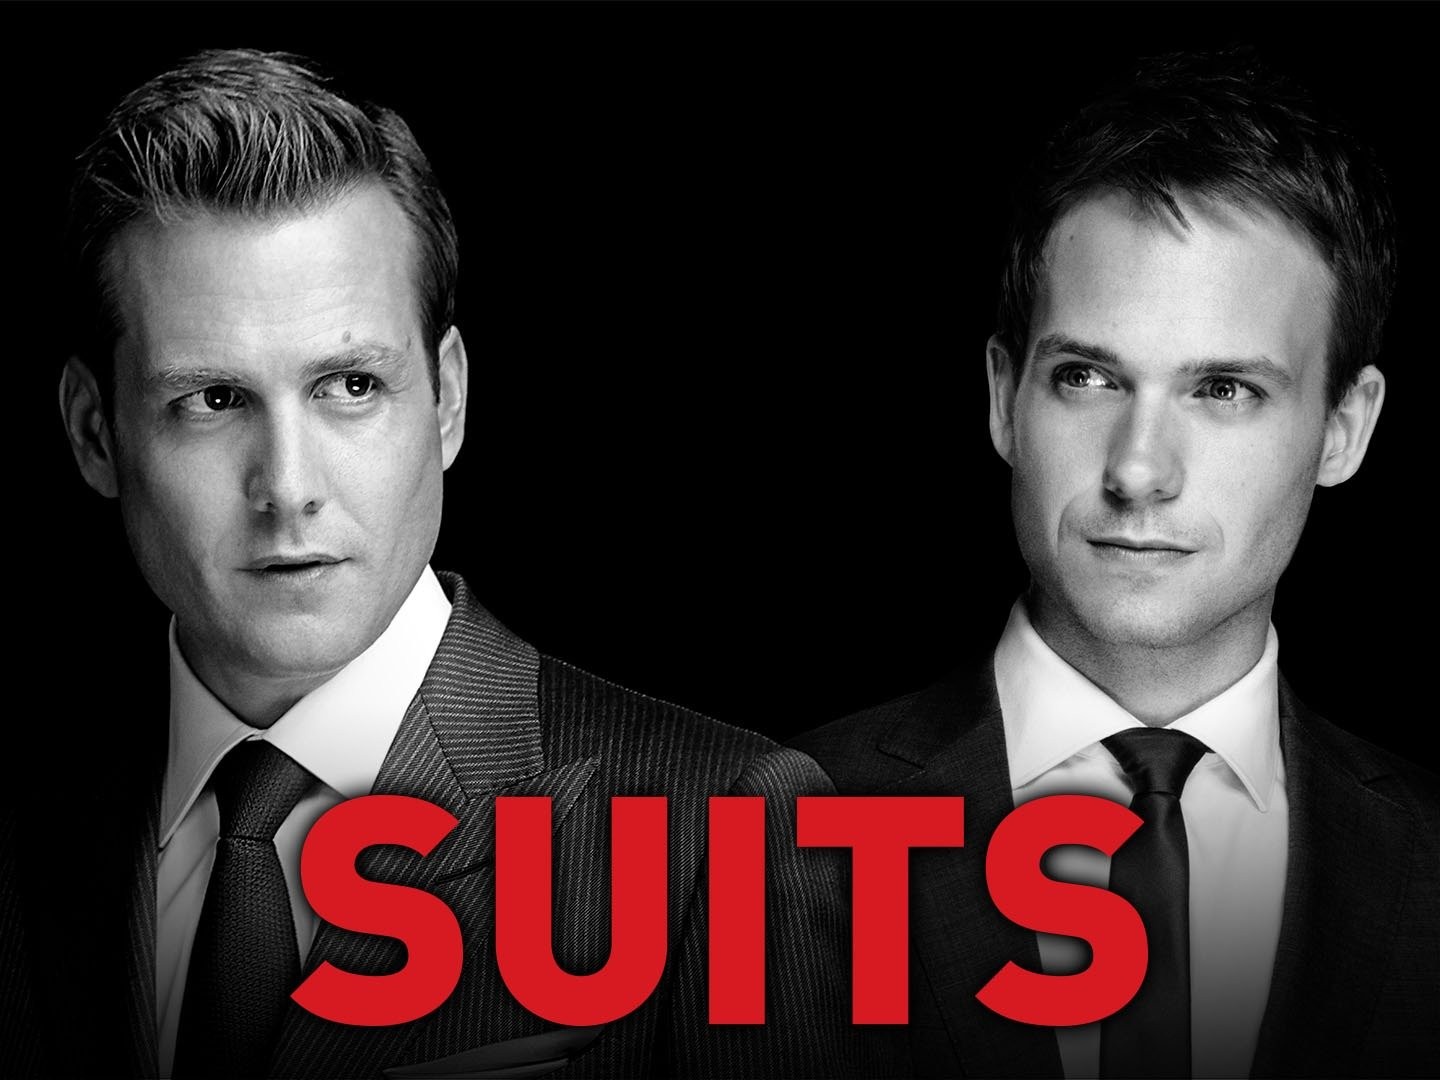 How to get the Suits TV show look | Moss